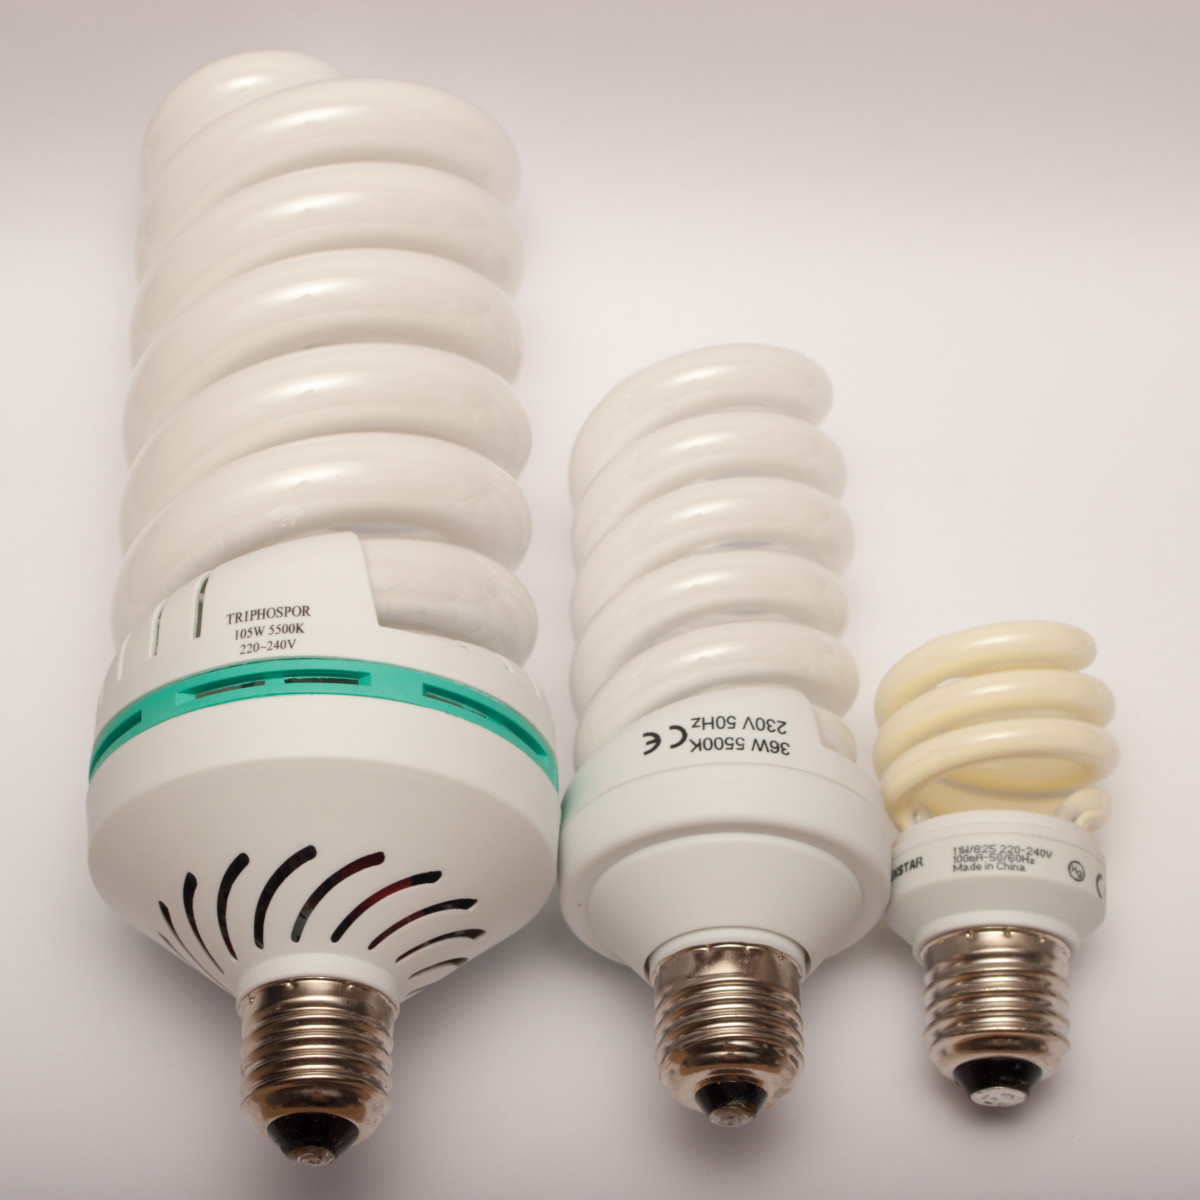 Comparison of compact fluorescent light bulbs with 105W, 36W und 11W